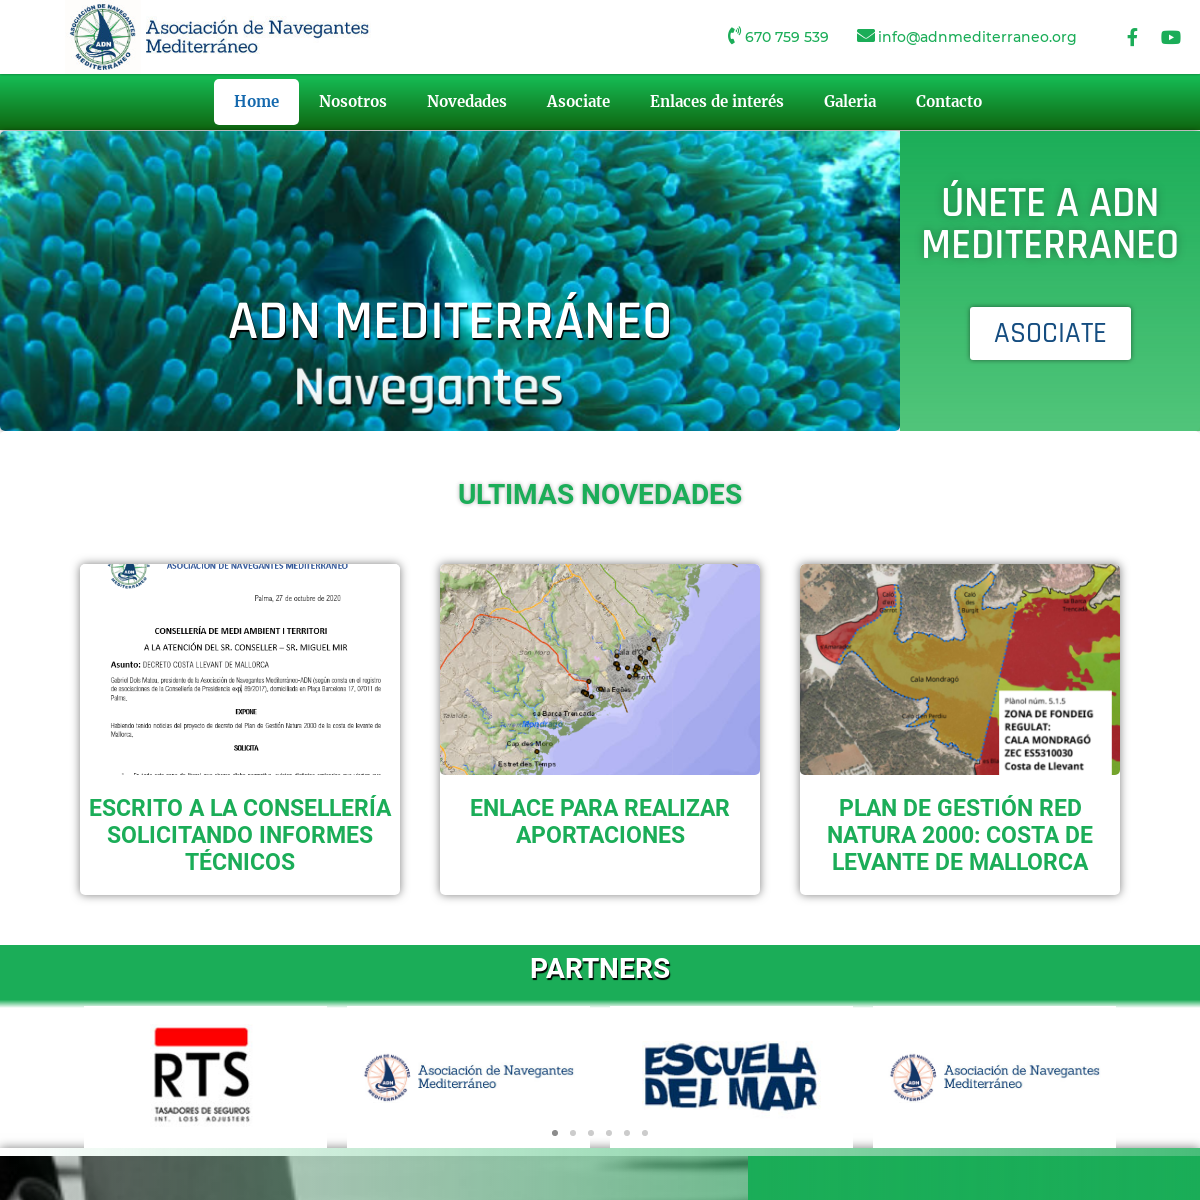 A complete backup of adnmediterraneo.org